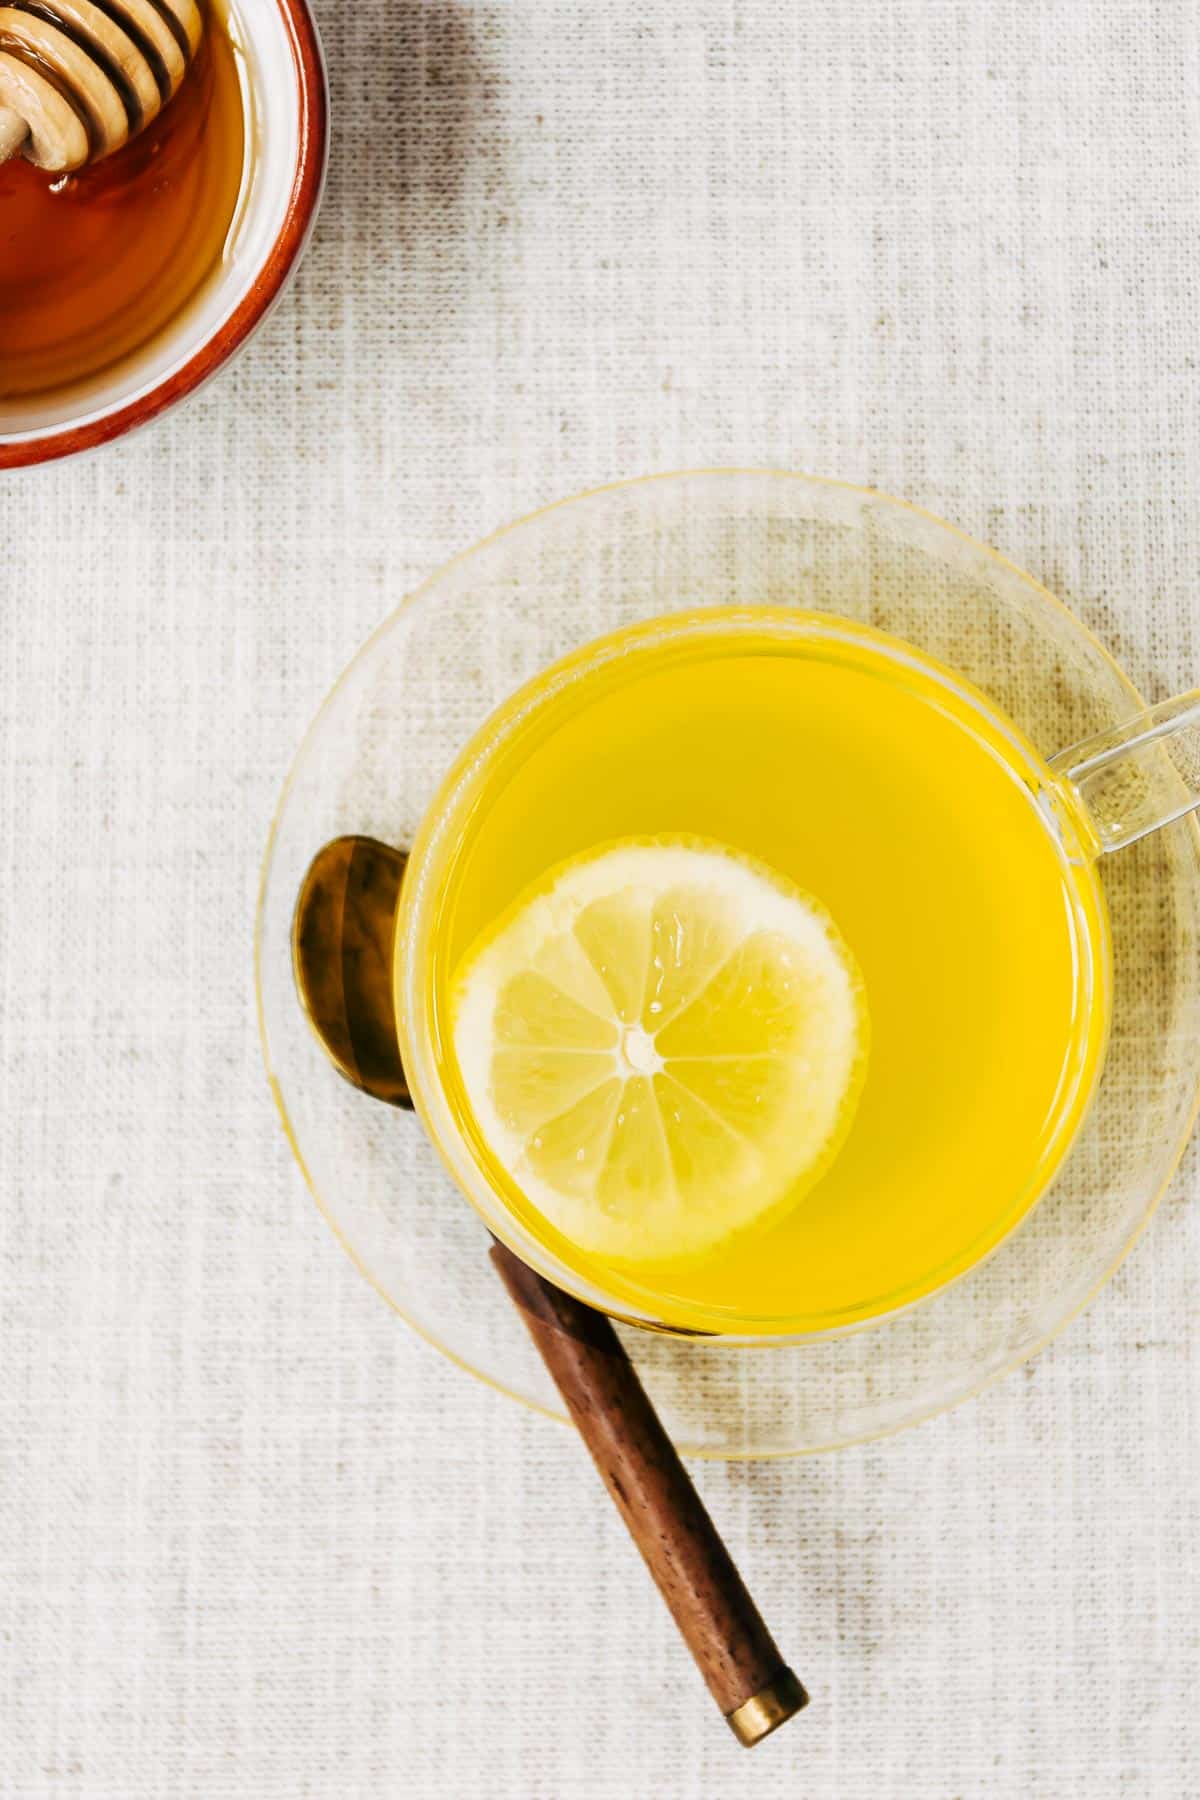 A glass cup of turmeric ginger tea with a lemon slice is photographed from the top view with a bowl of honey and sliced lemons.